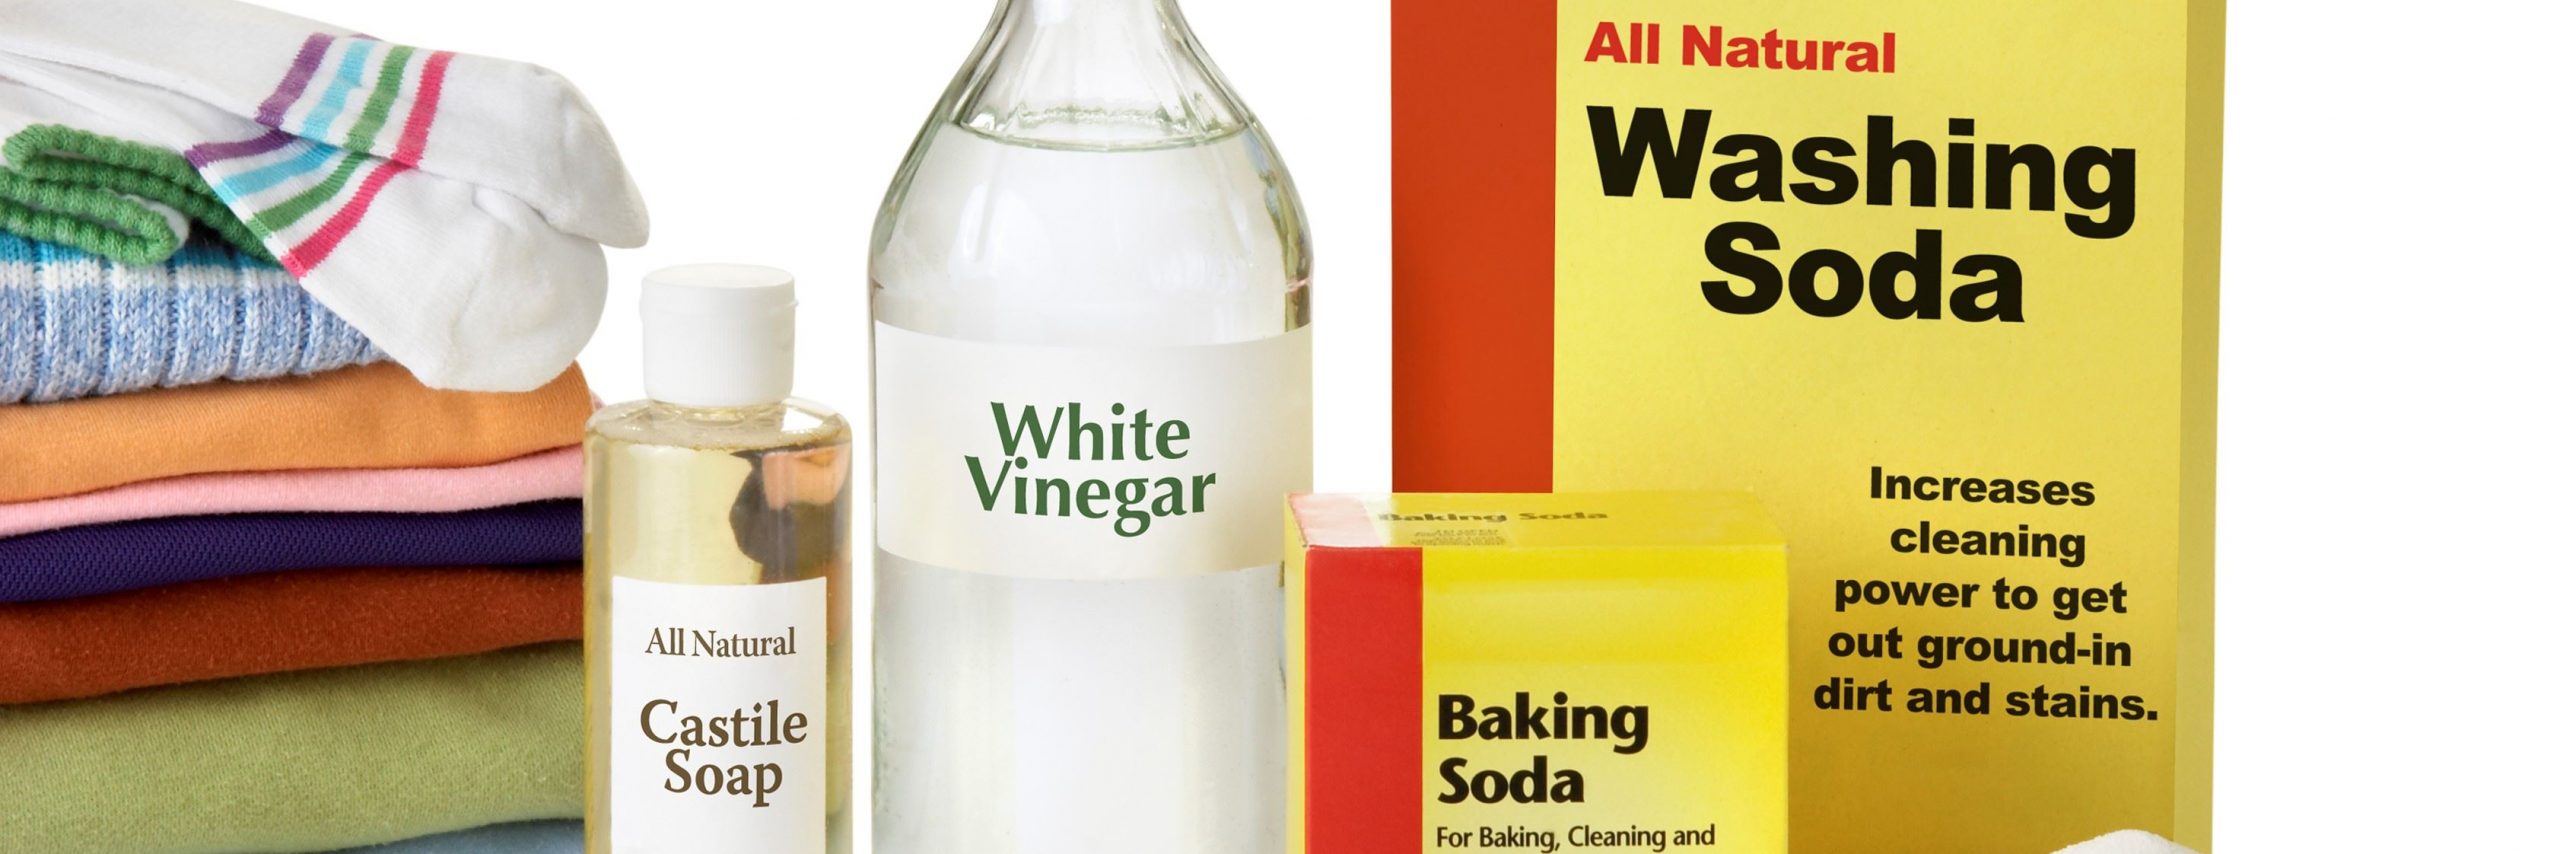 Why Is Vinegar and Baking Soda Such an Effective Cleaner?